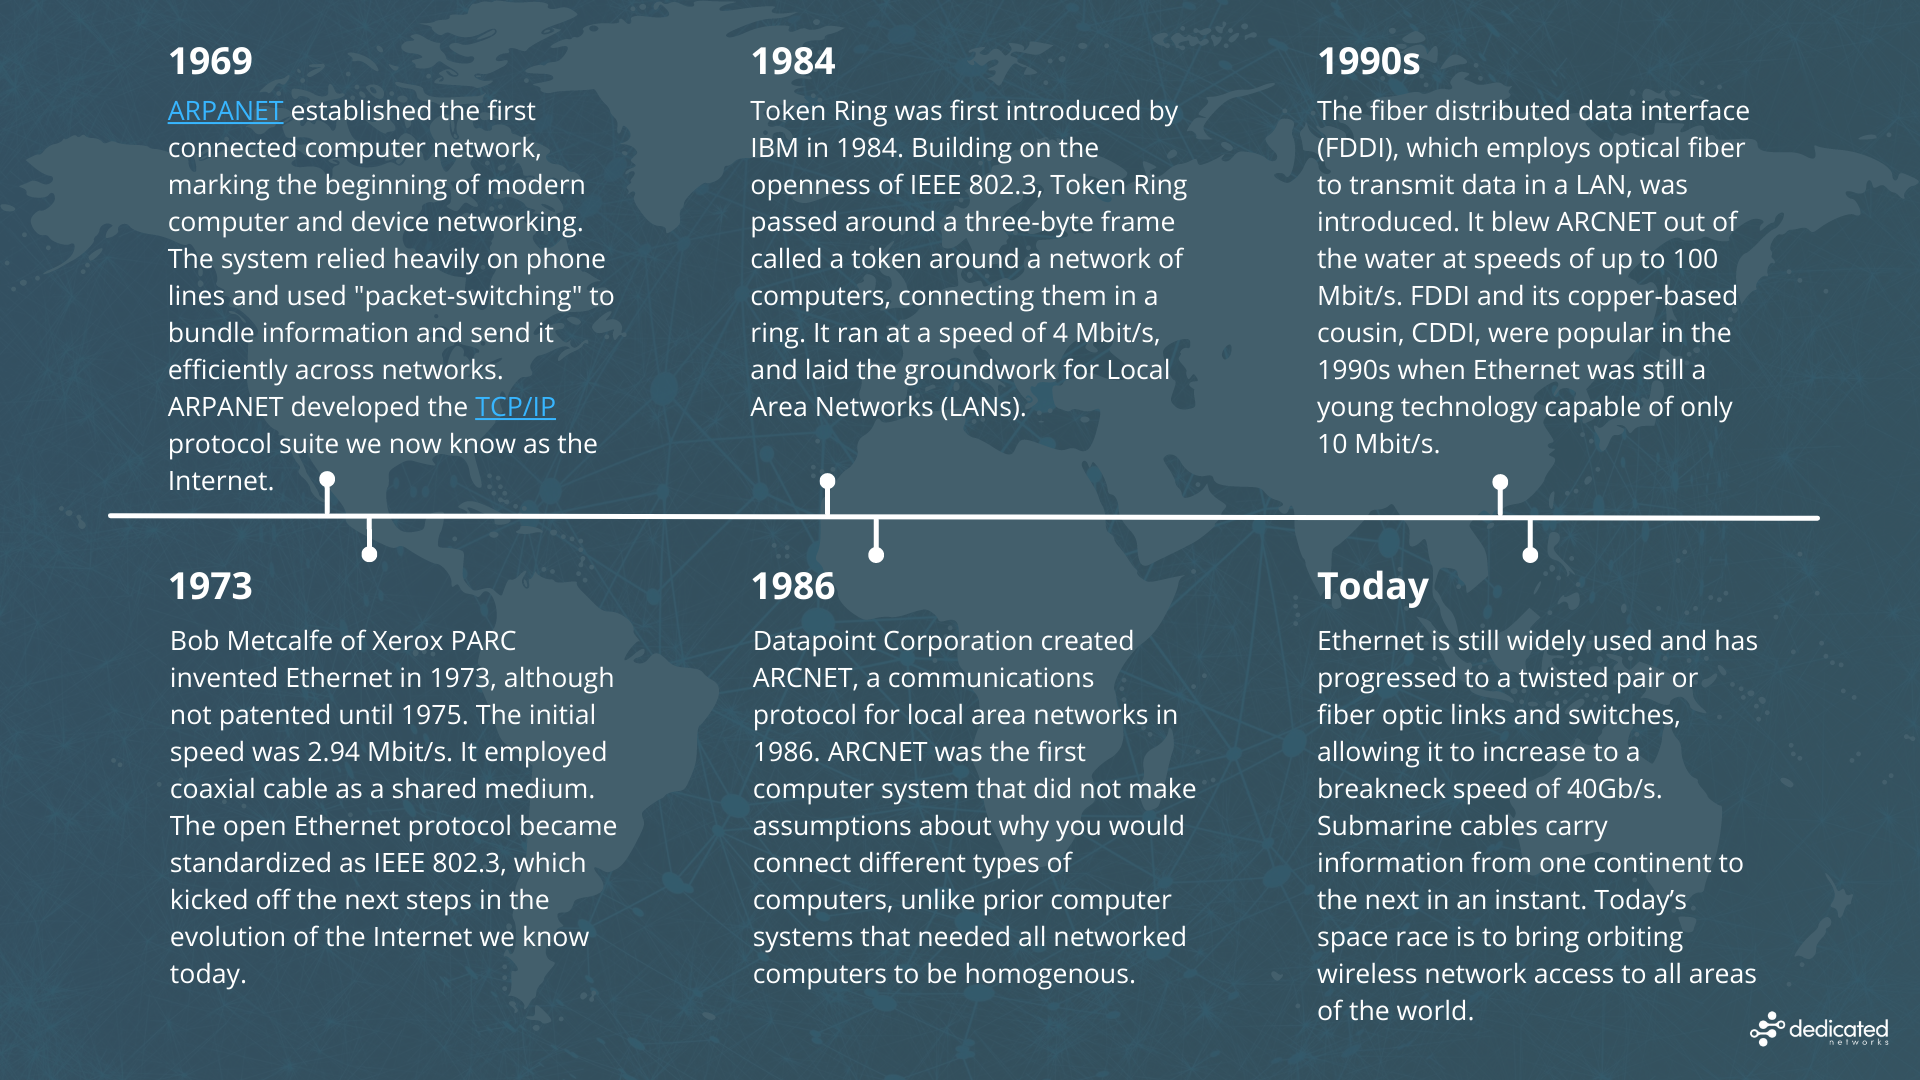 A brief history of data networks. Describing the evolution of ethernet, ARCNET, ARPANET, TCP/IP, FDDI, CDDI, and submarine fiber optic cables